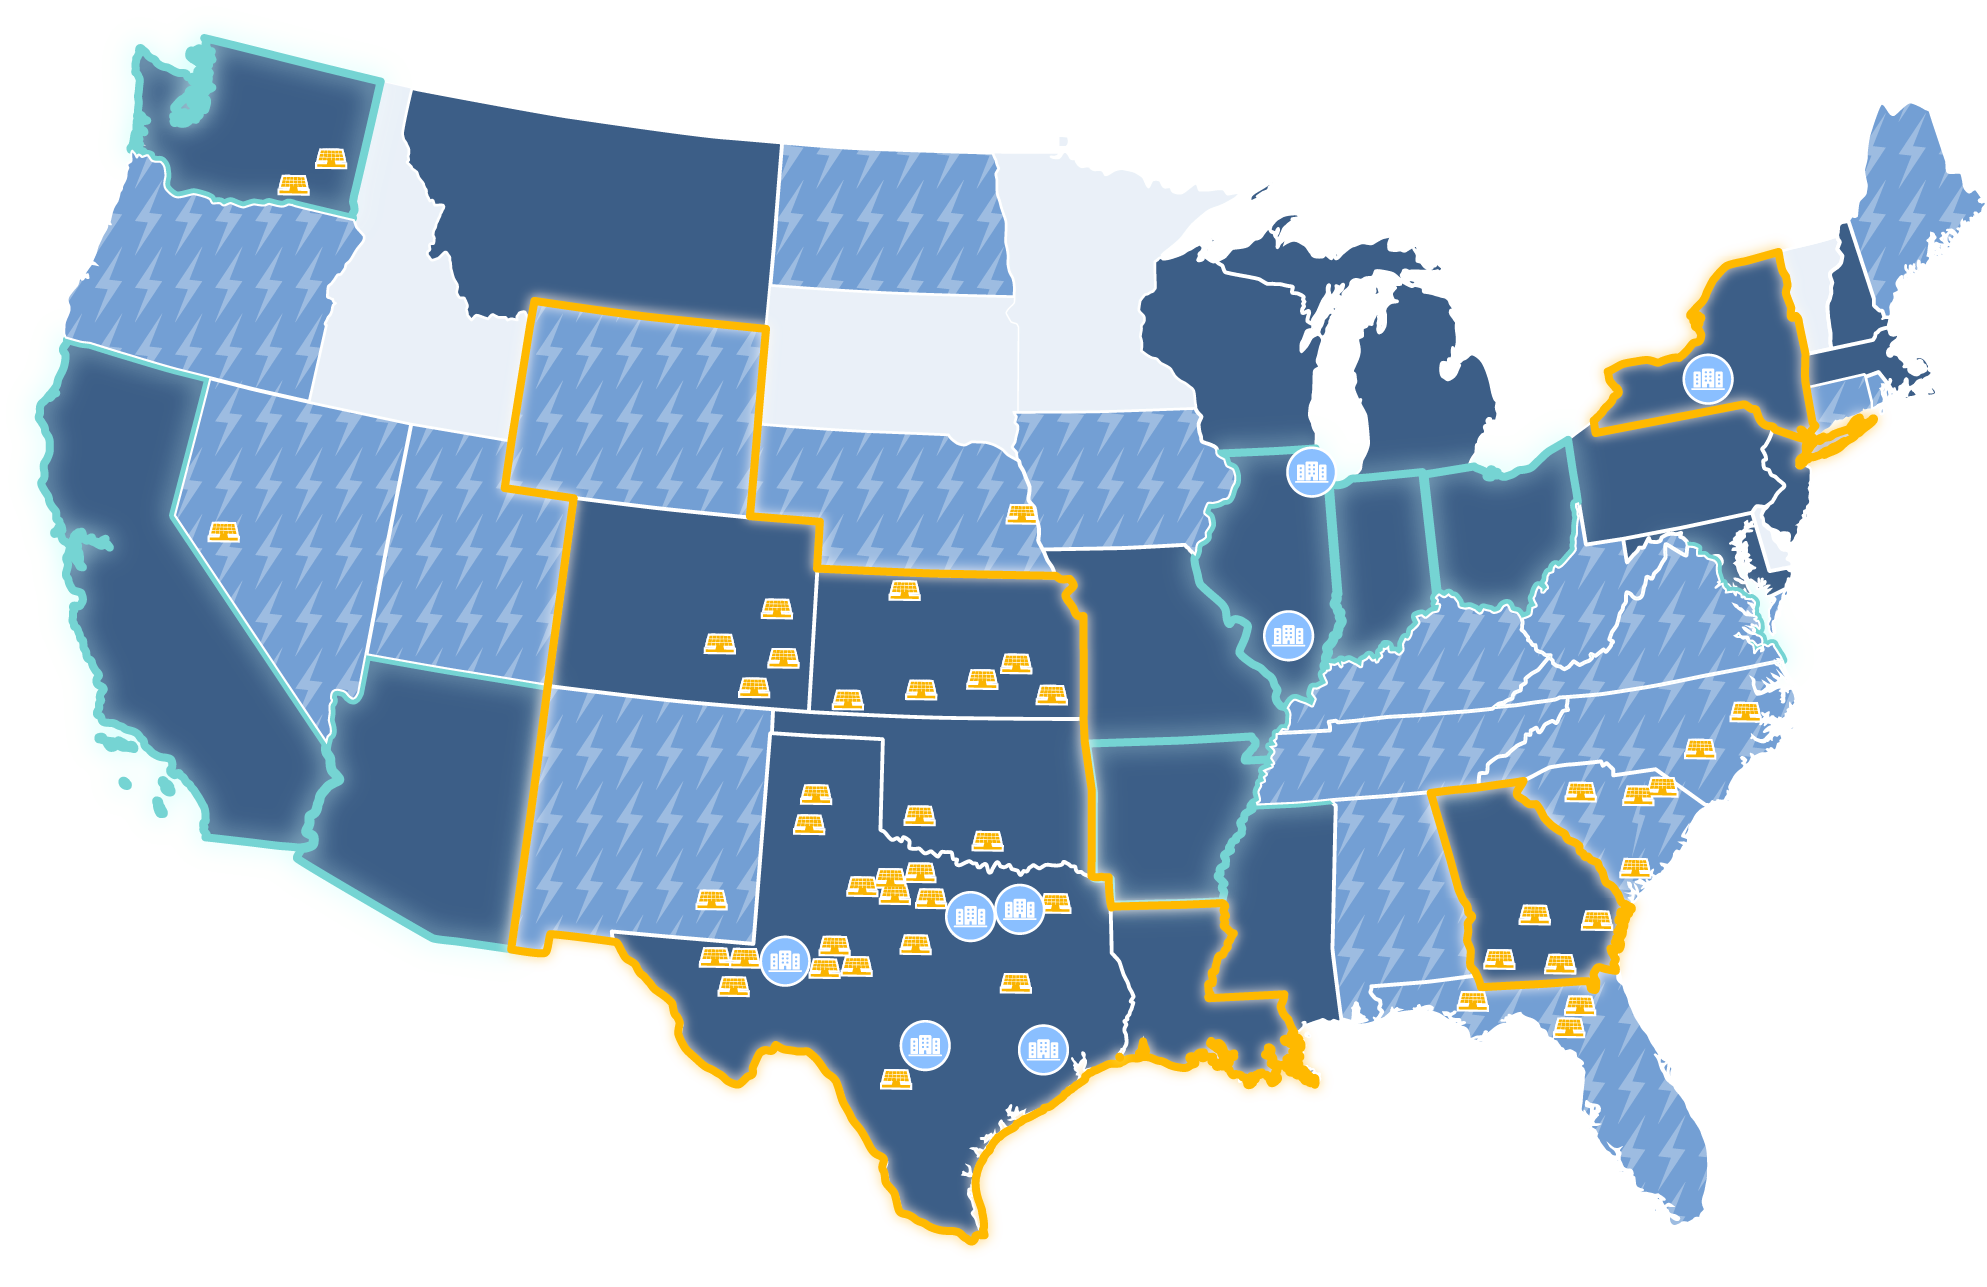 map of the United States with icons displaying office locations and energy implementation